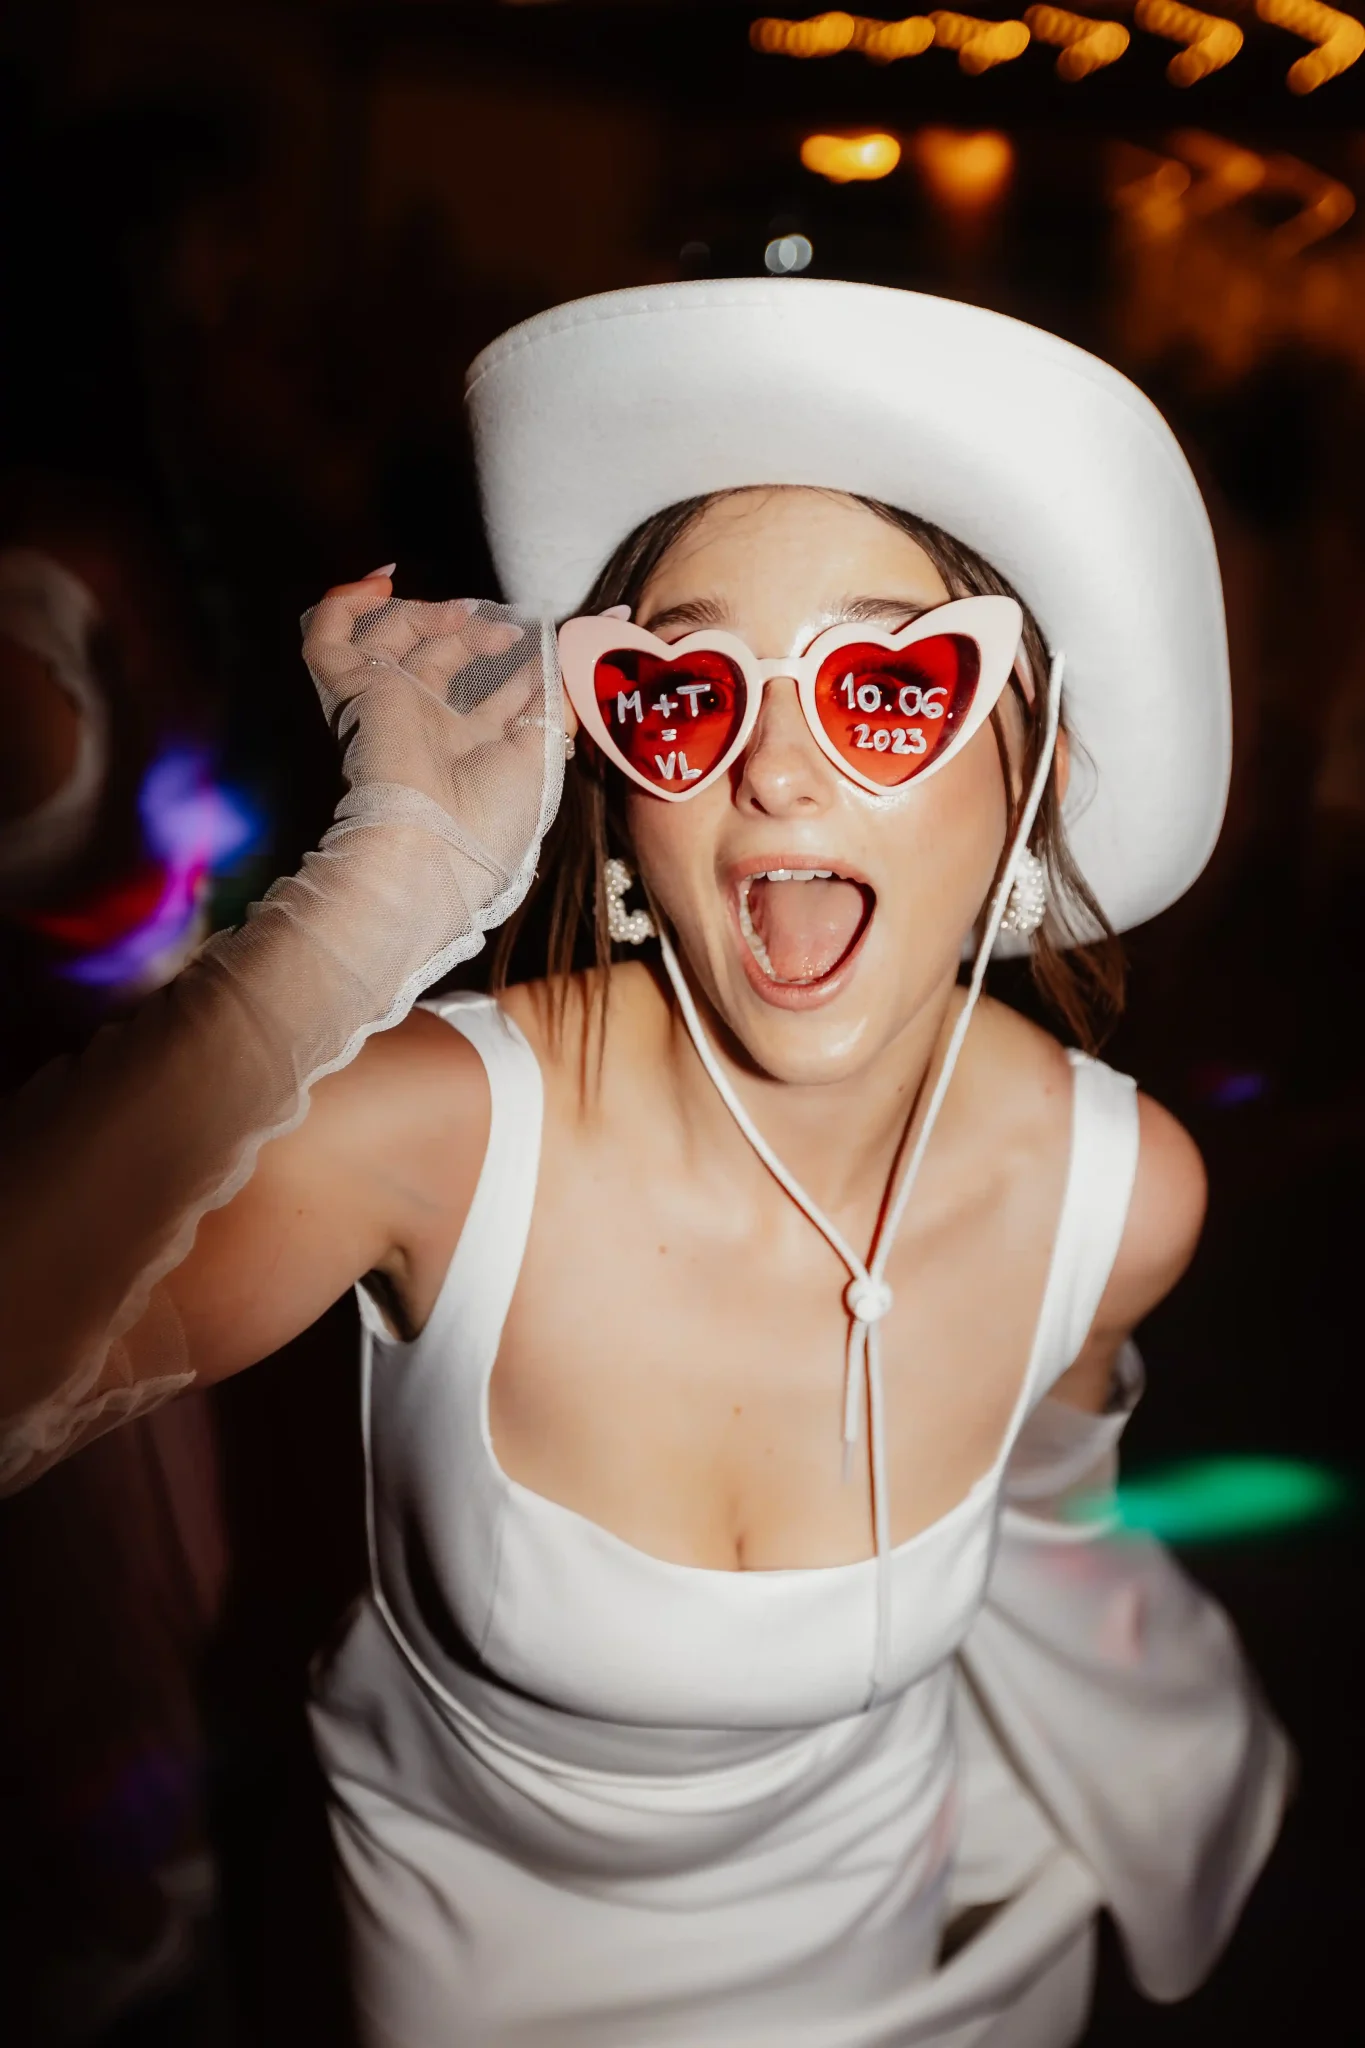 A woman in a white dress and hat is wearing sunglasses.